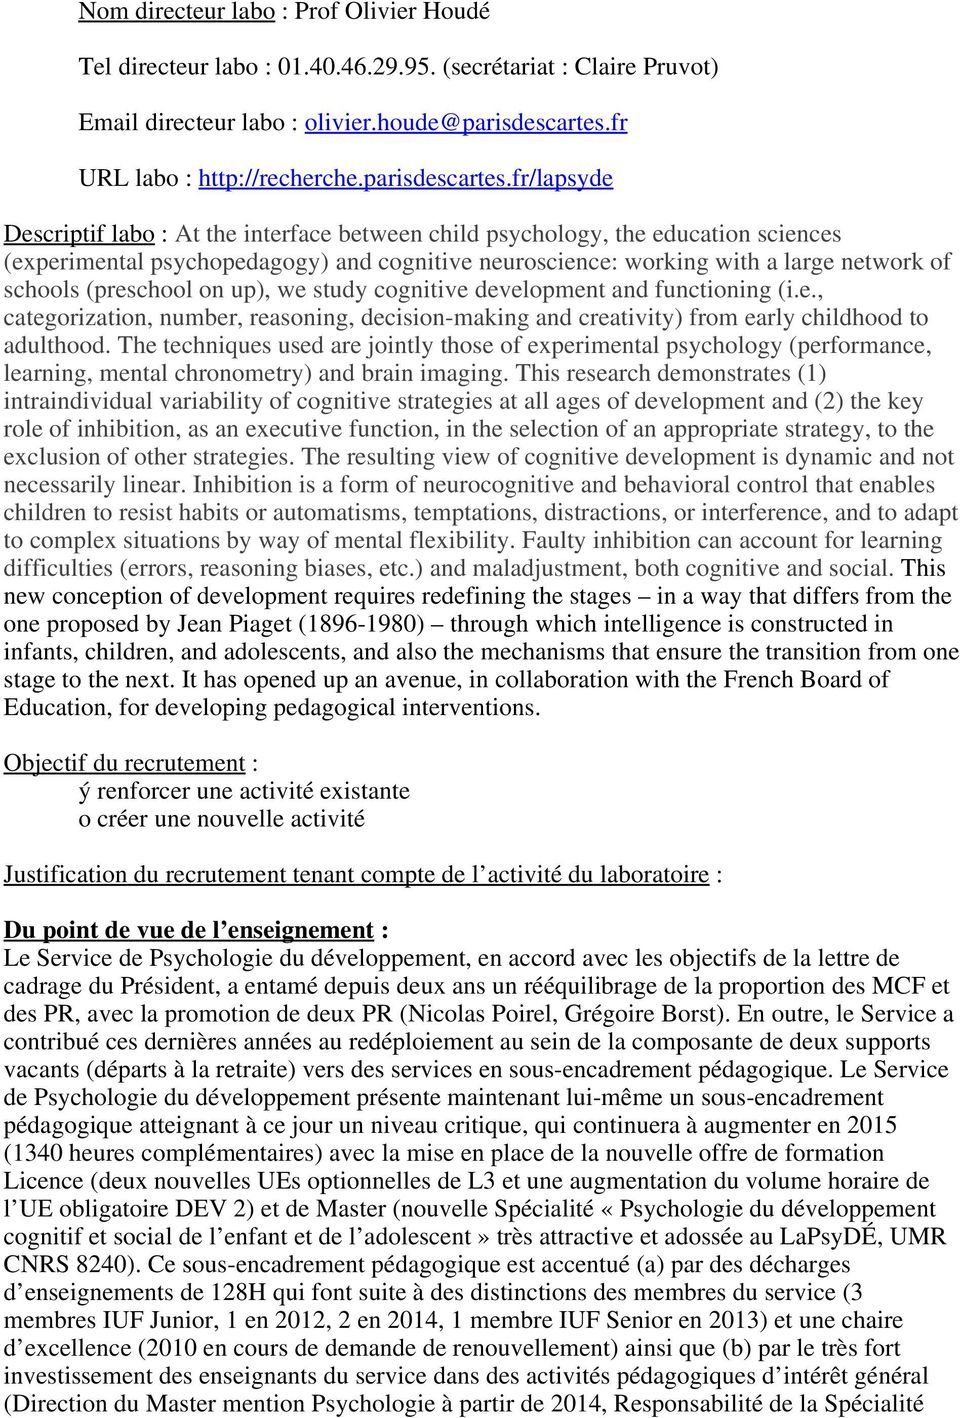 fr/lapsyde Descriptif labo : At the interface between child psychology, the education sciences (experimental psychopedagogy) and cognitive neuroscience: working with a large network of schools